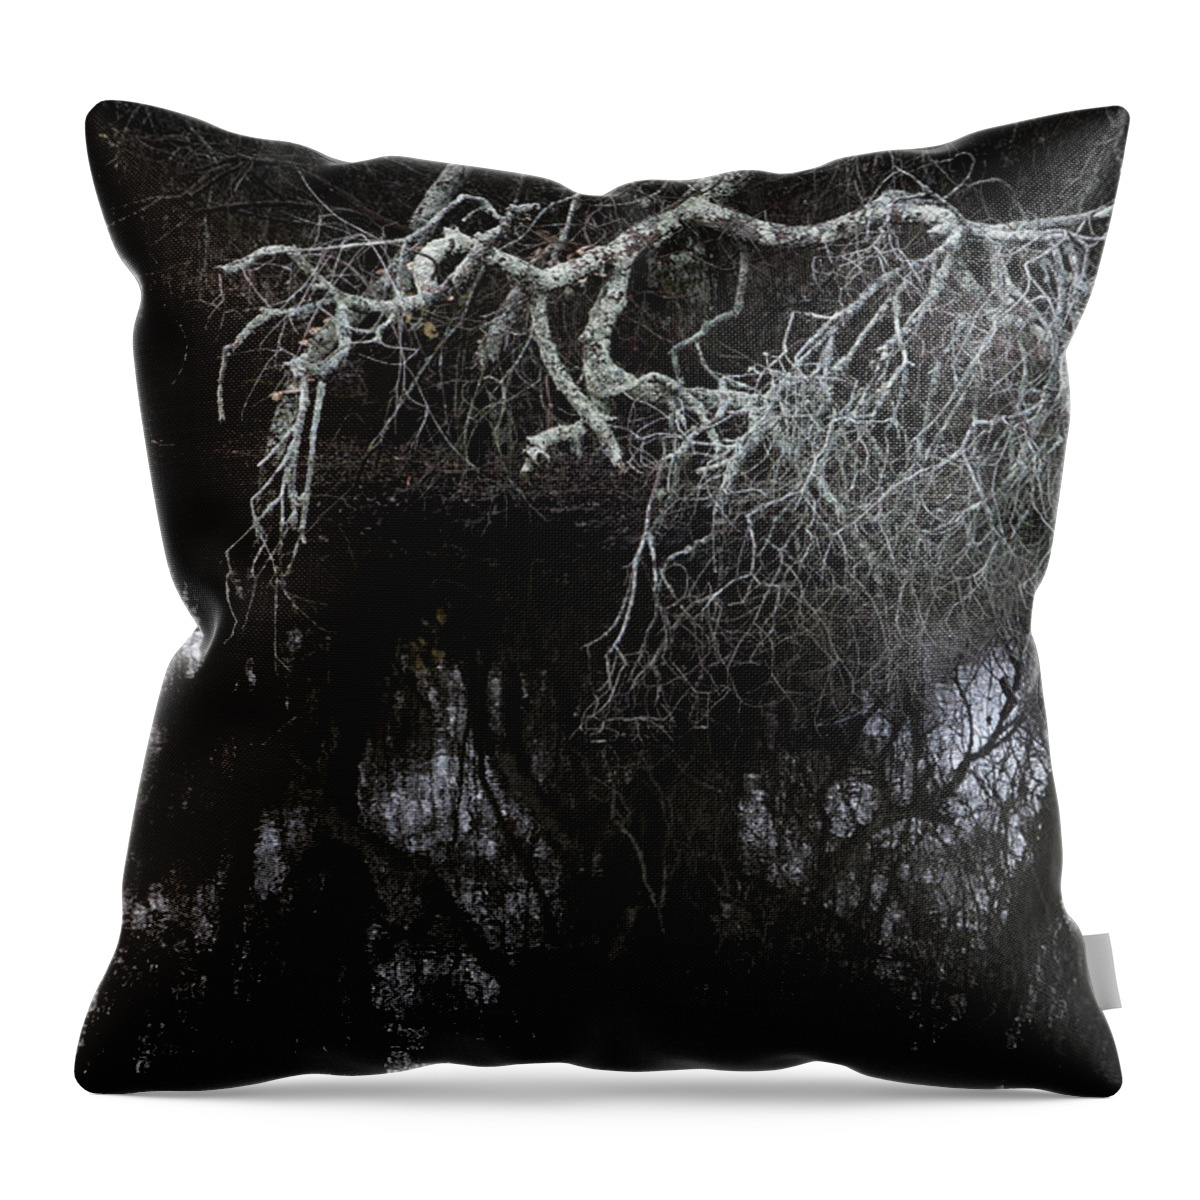 Monochrome Throw Pillow featuring the digital art Tree branches mirrored in stream by Perry Van Munster